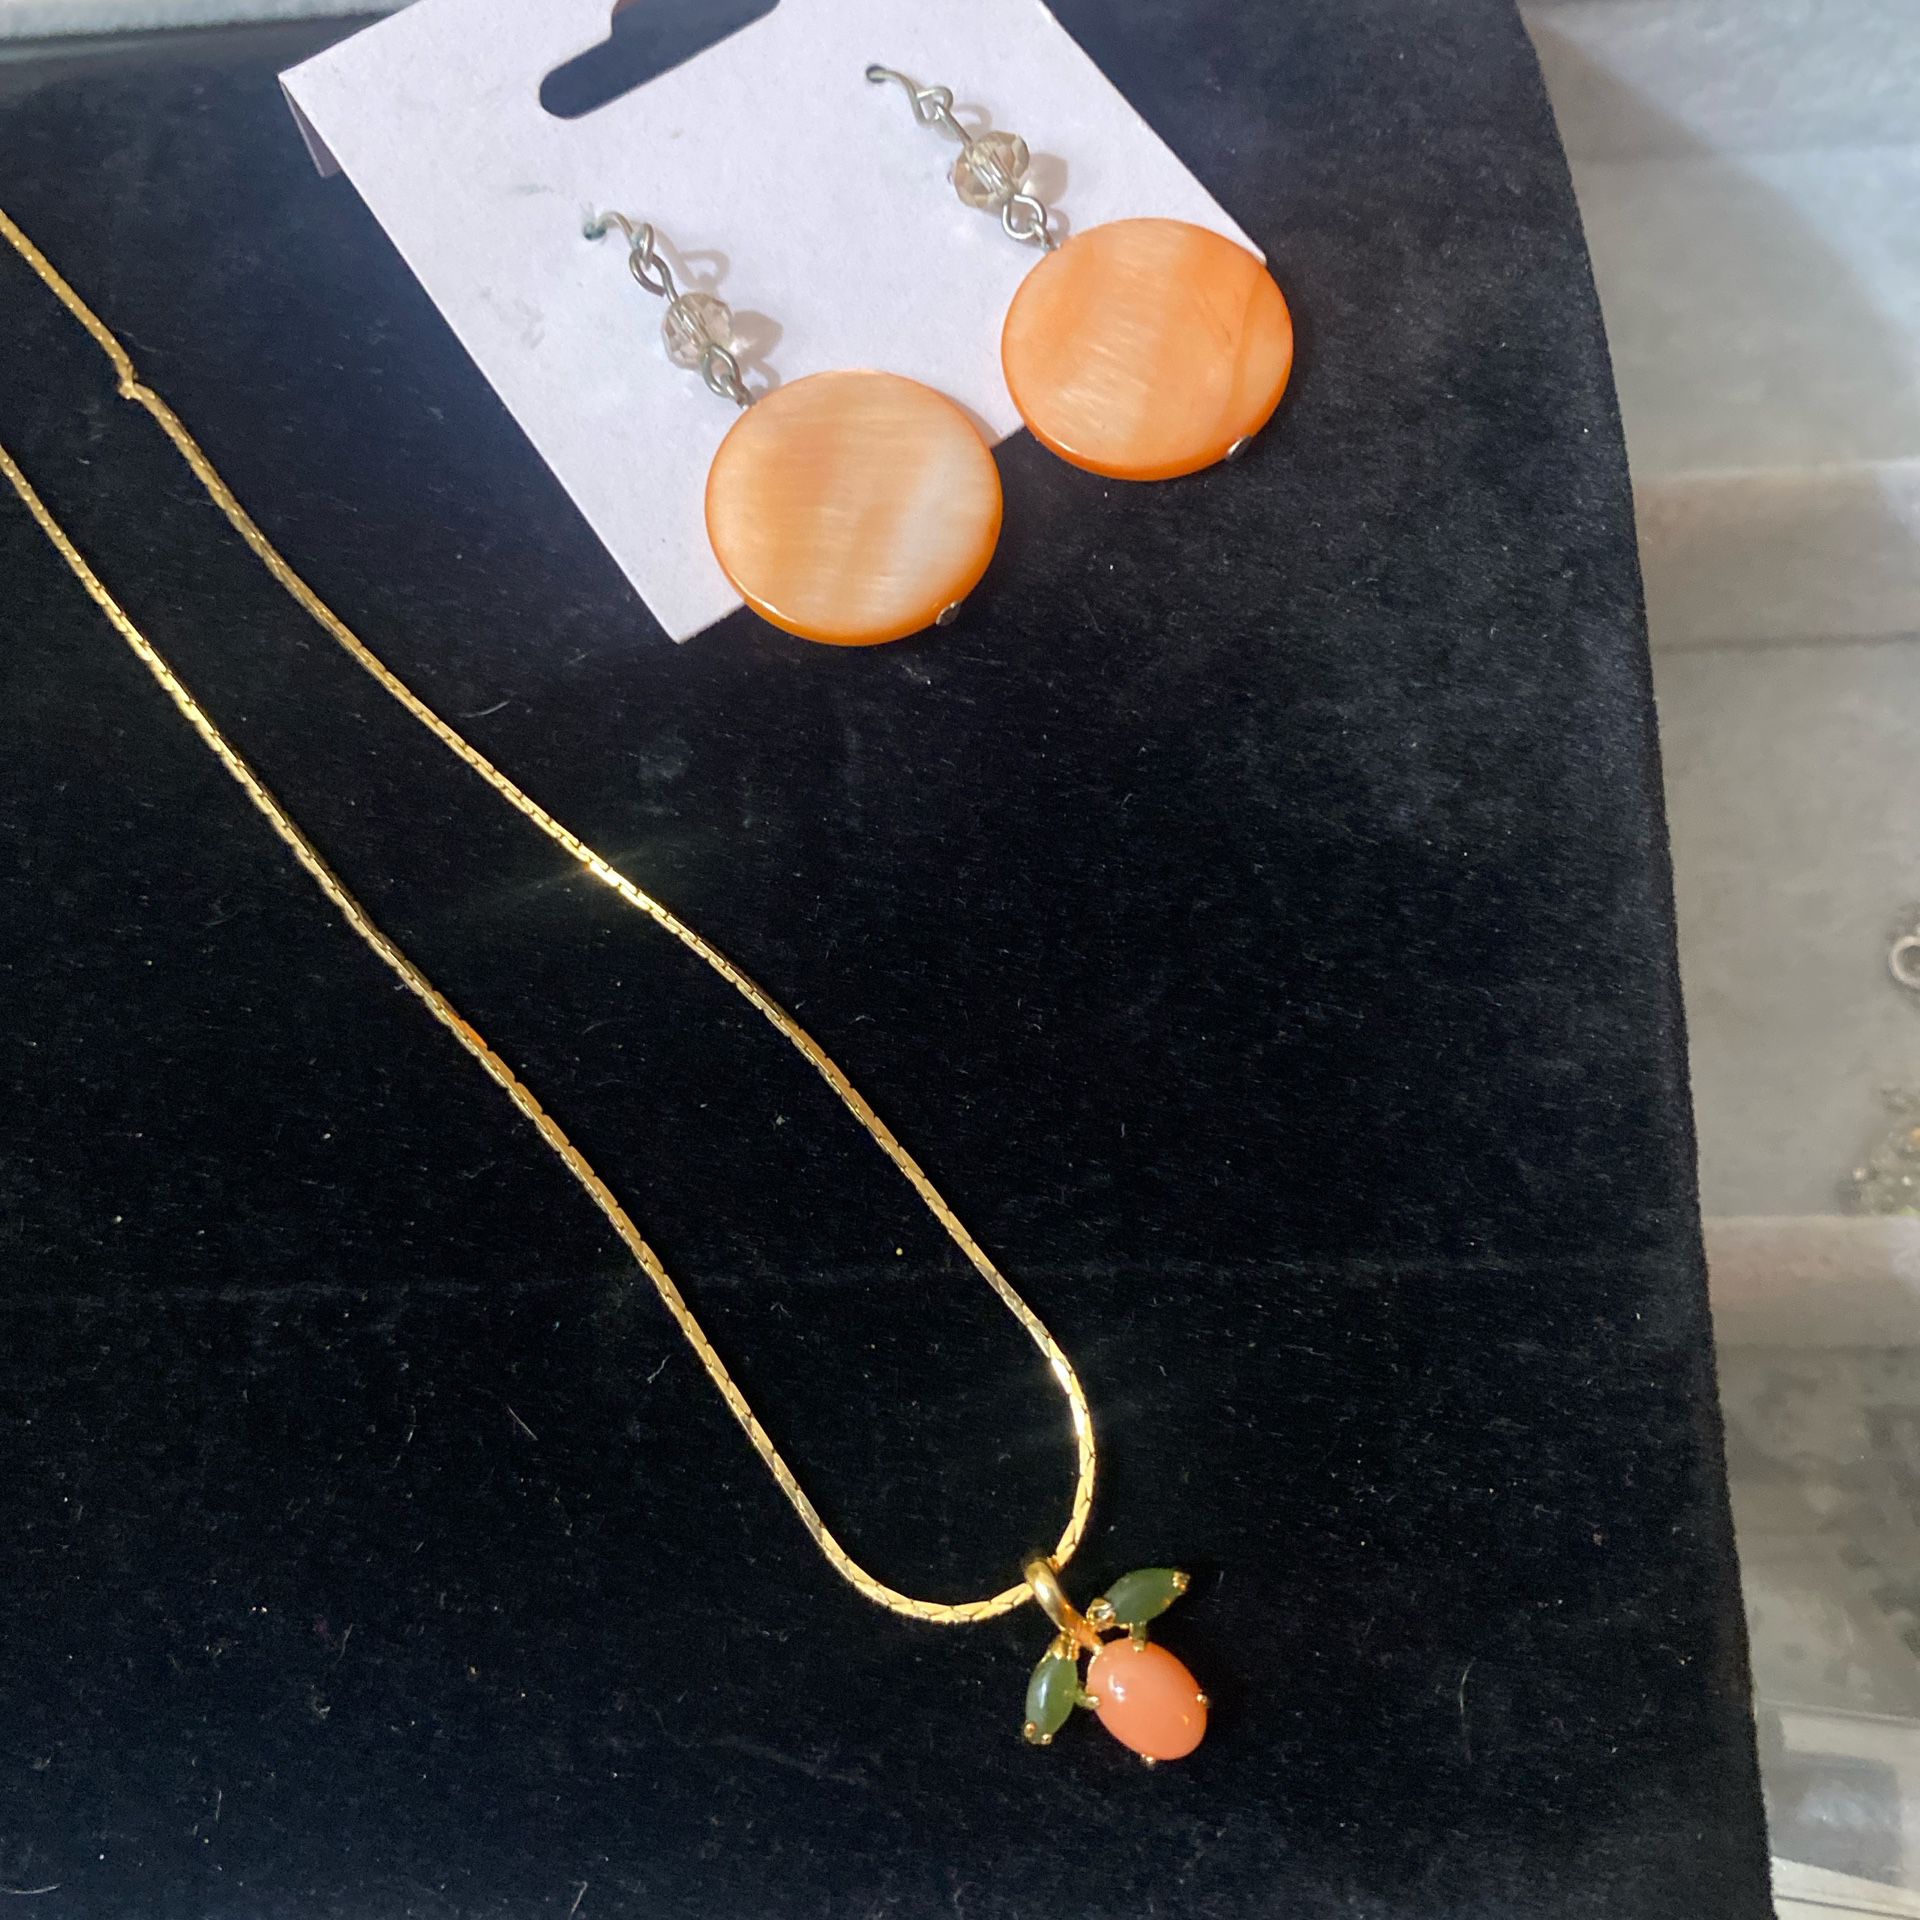 Gold Tone Necklace With Peach Pendant & Earrings Set